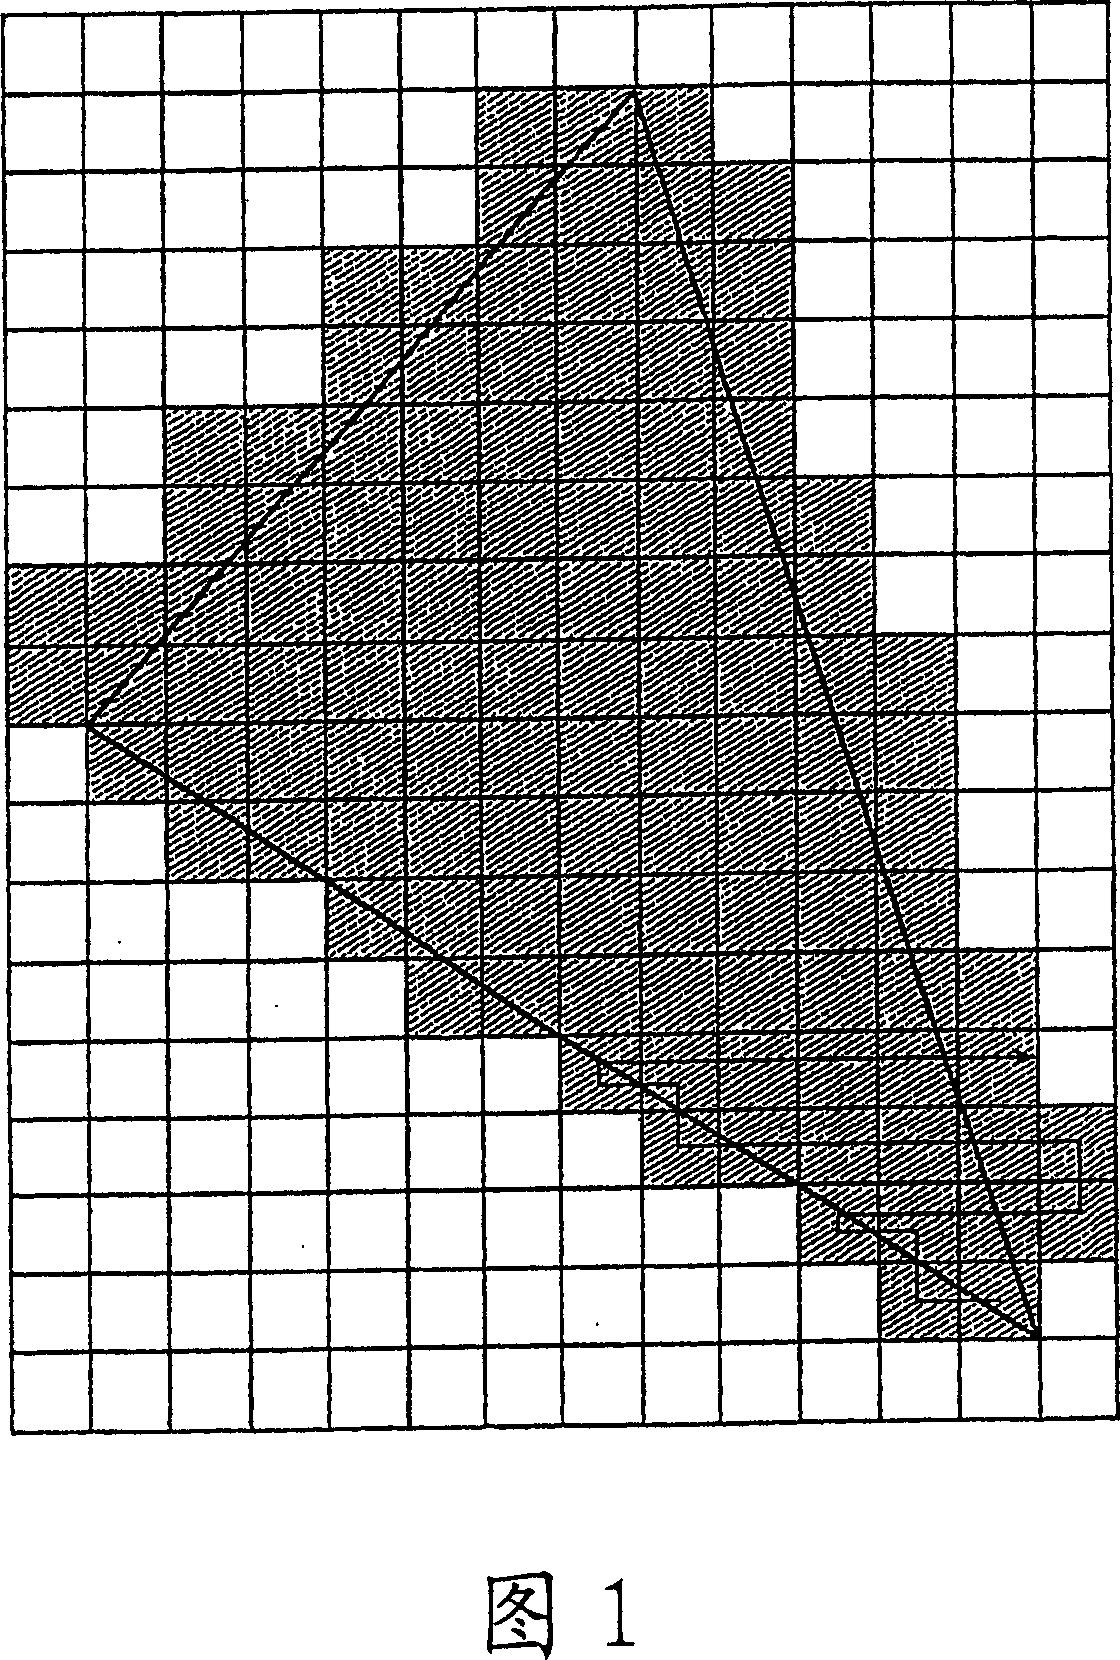 Graphics processing apparatus, methods and computer program products using minimum-depth occlusion culling and zig-zag traversal